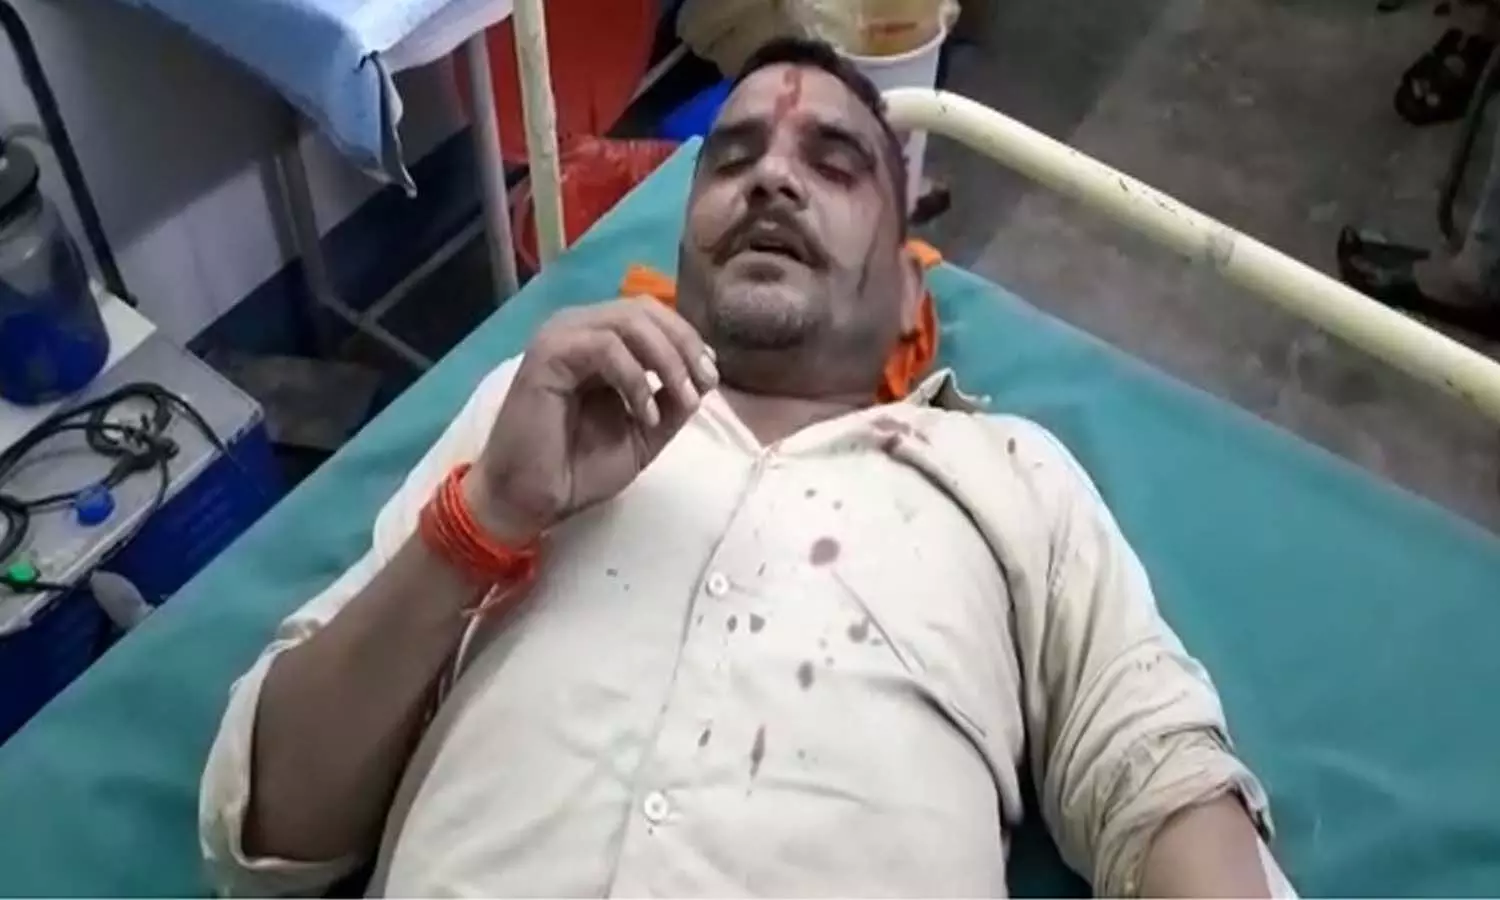 Attack on Bajrang Dal workers, case registered against 30-40 unknown miscreants